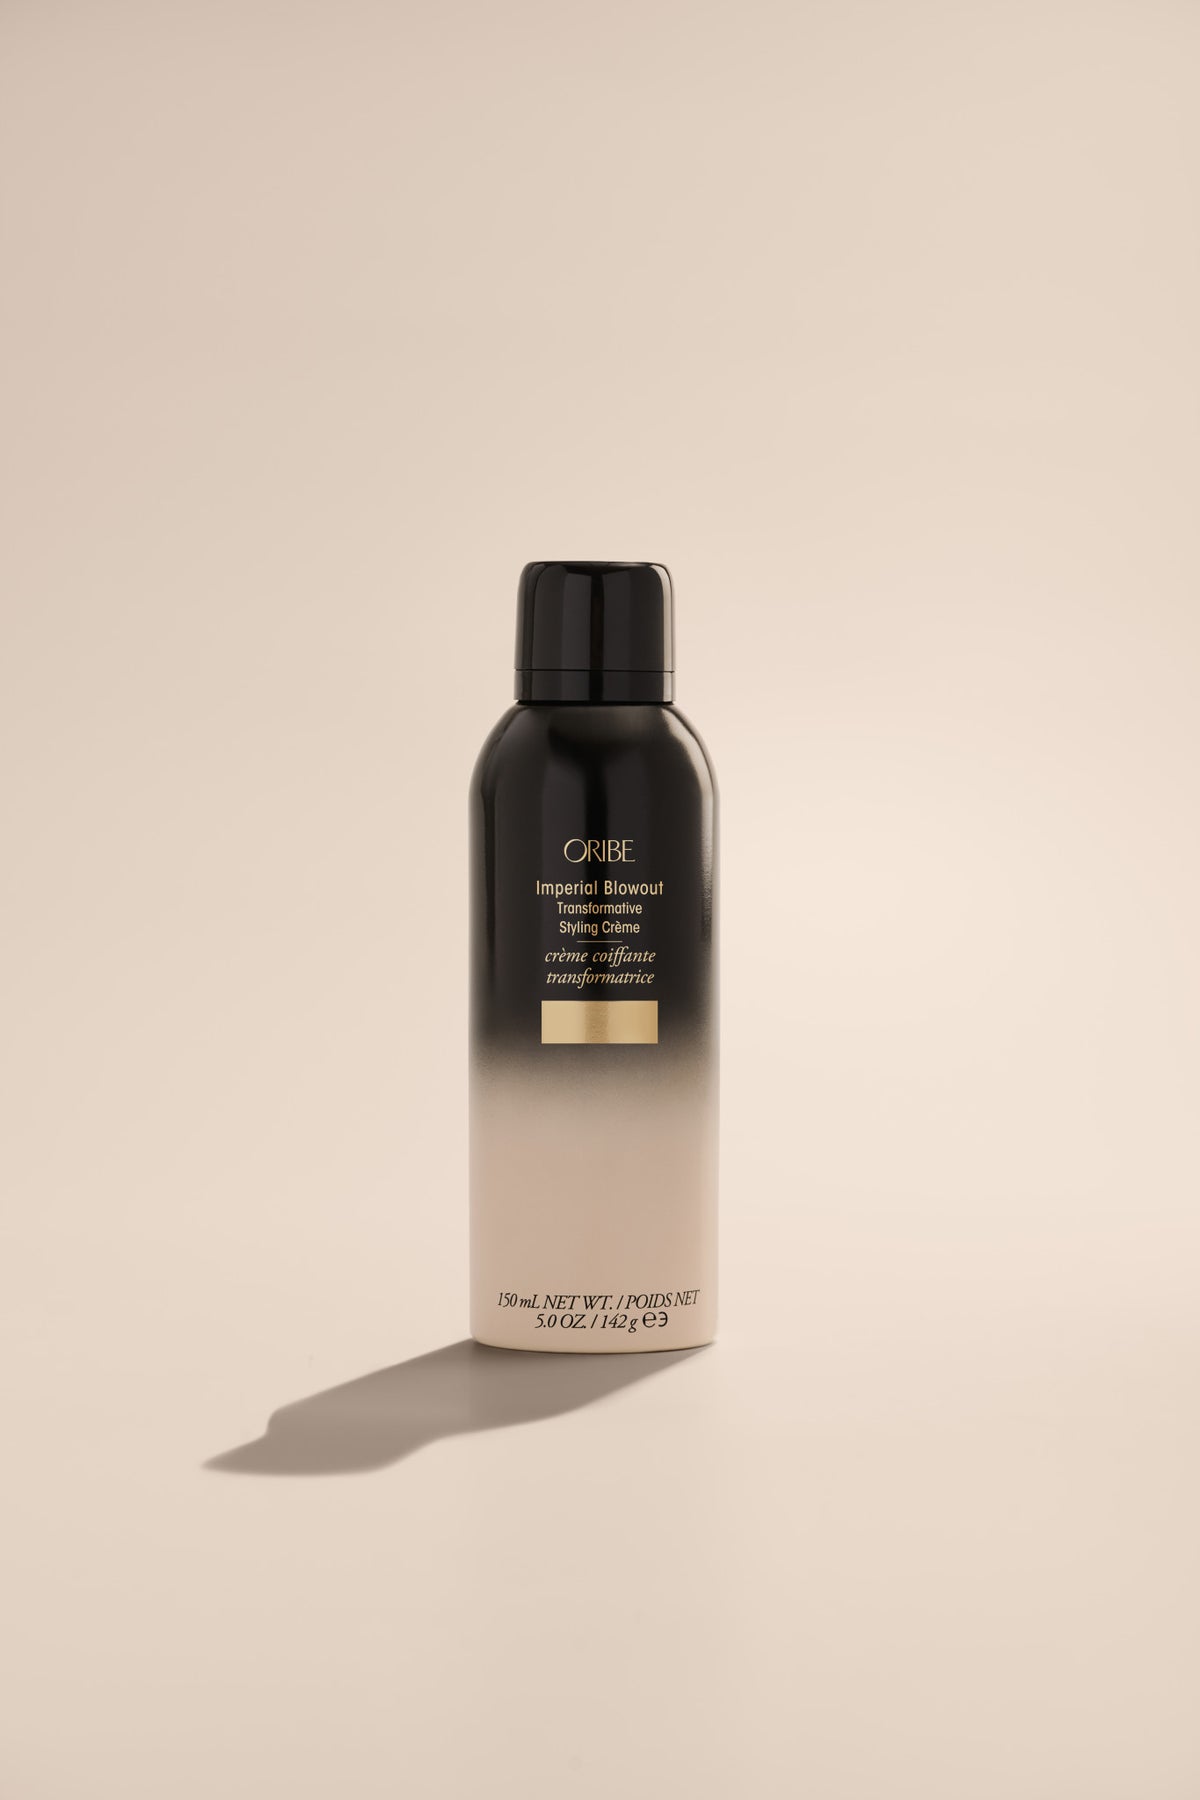 Oribe Imperial Blowout Transformative Styling Crème .